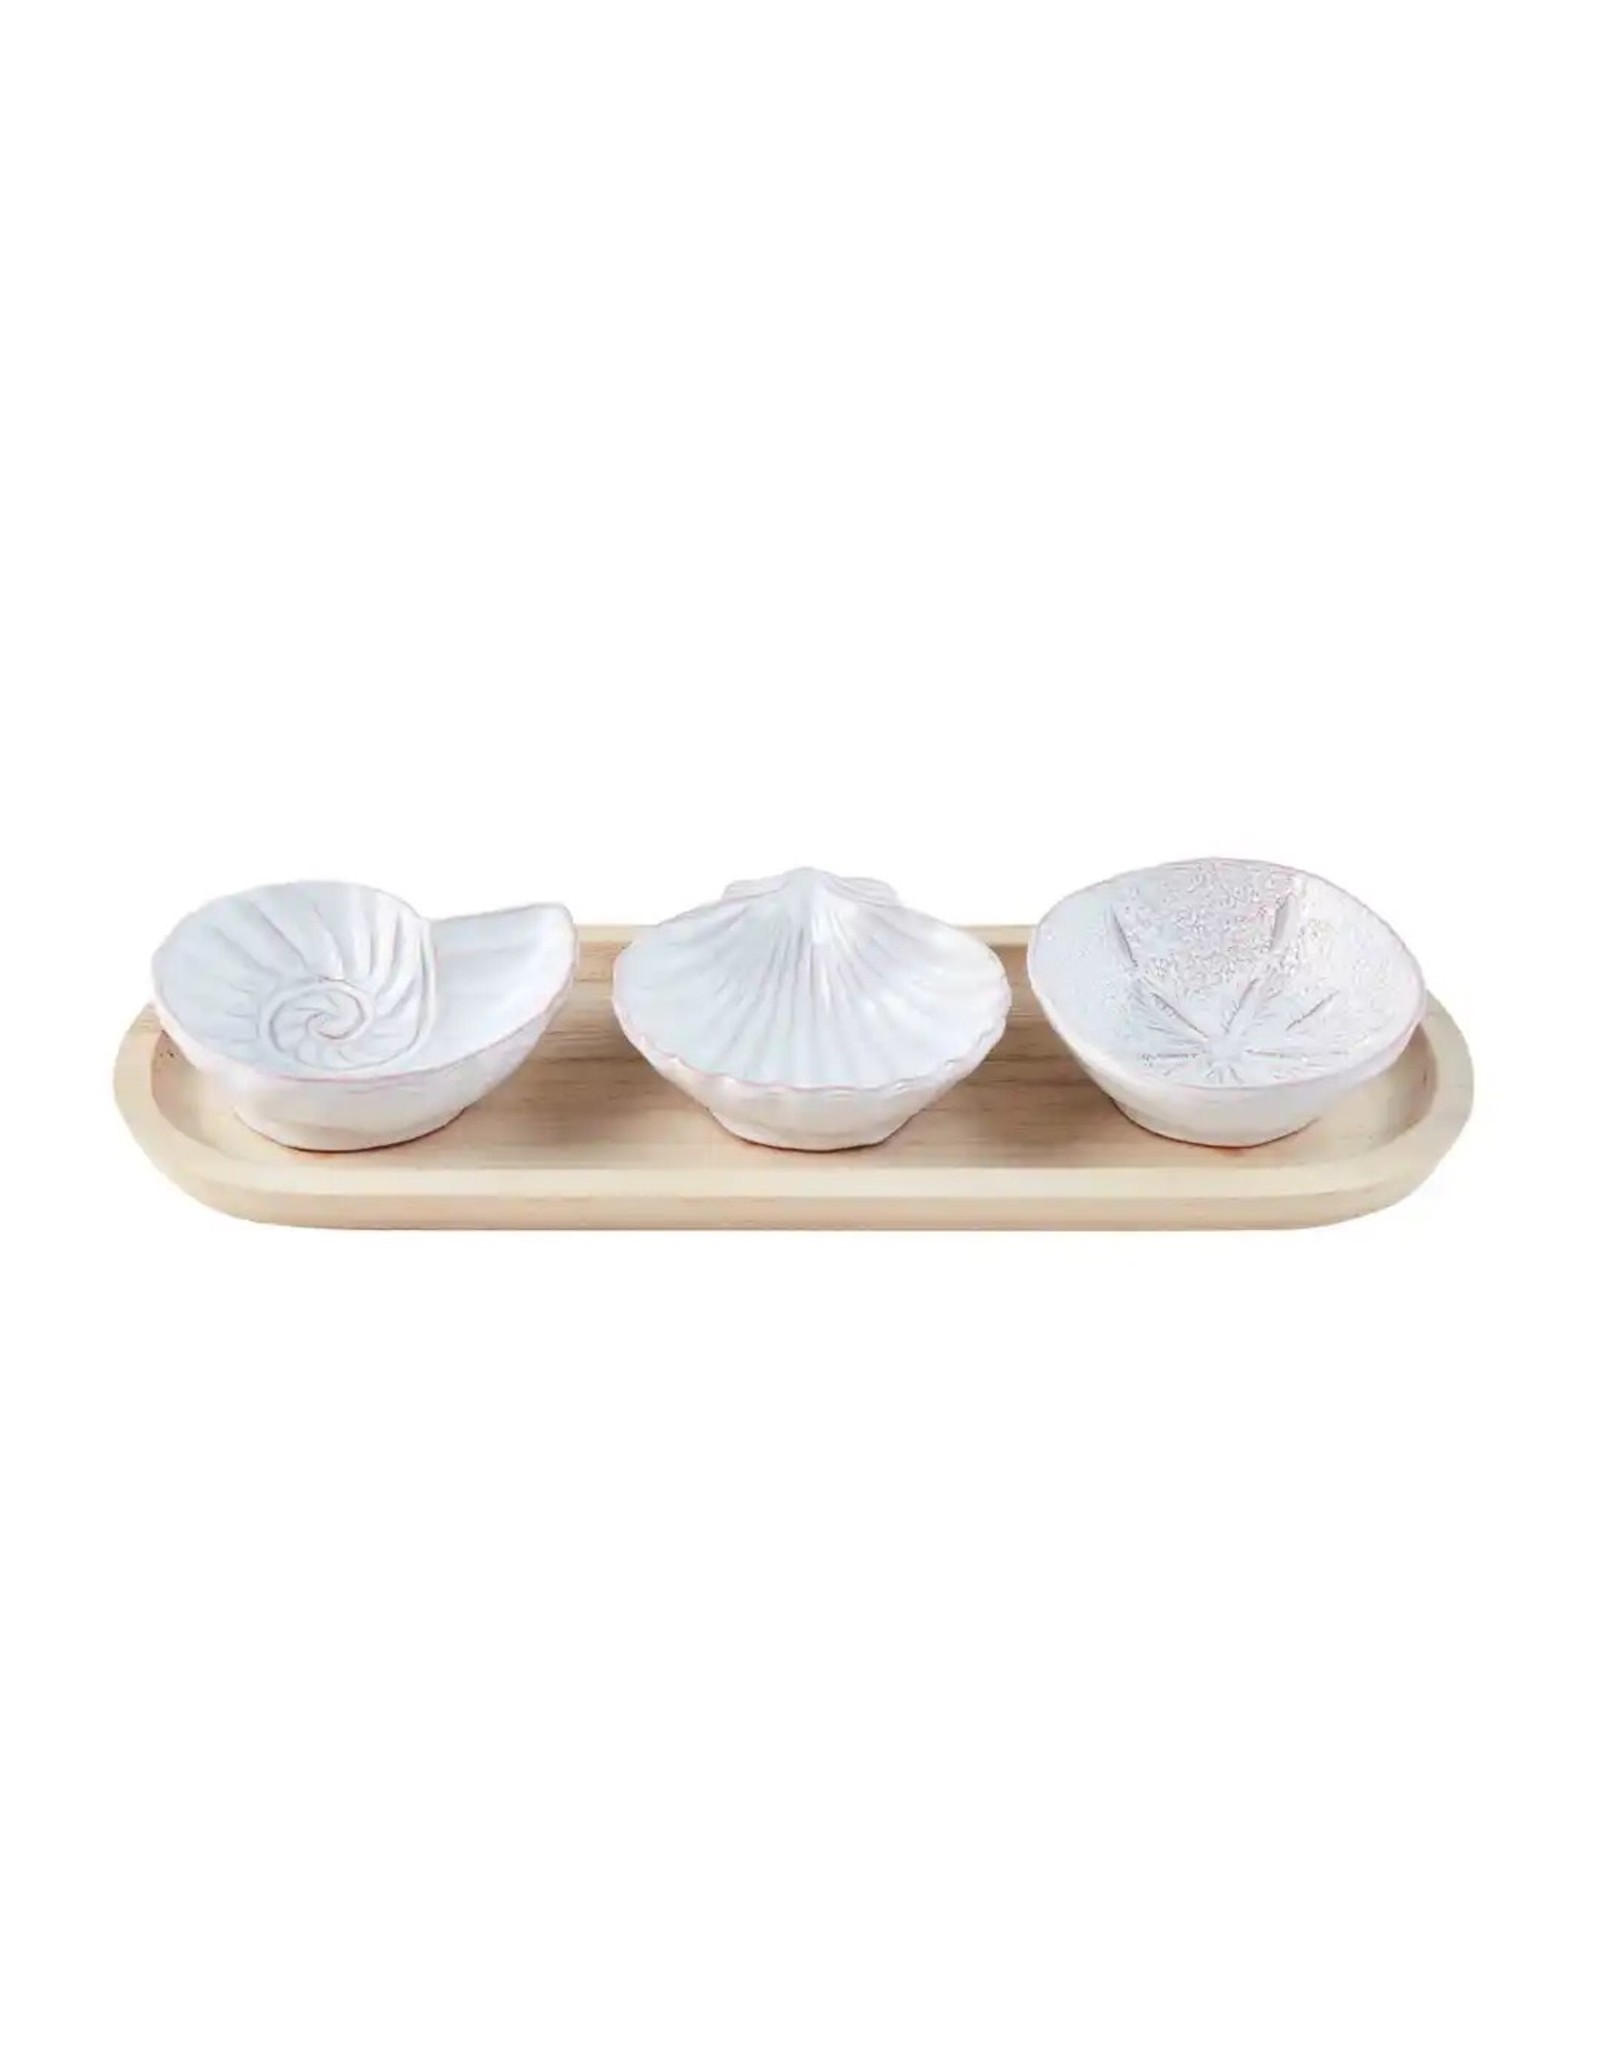 Mud Pie Shell Dip Bowls and Wood Tray Set